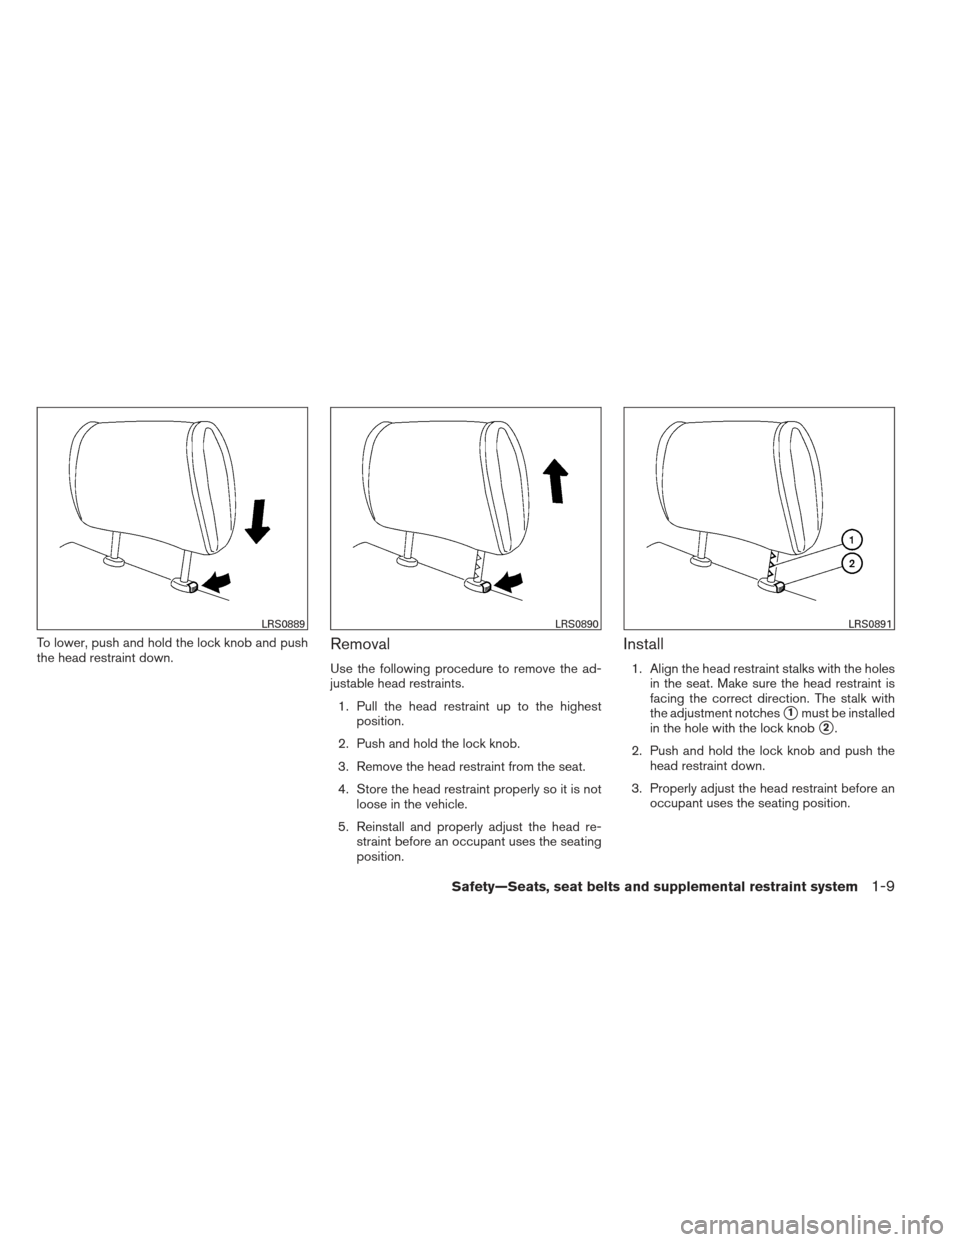 NISSAN MAXIMA 2012 A35 / 7.G Owners Manual To lower, push and hold the lock knob and push
the head restraint down.Removal
Use the following procedure to remove the ad-
justable head restraints.1. Pull the head restraint up to the highest posit